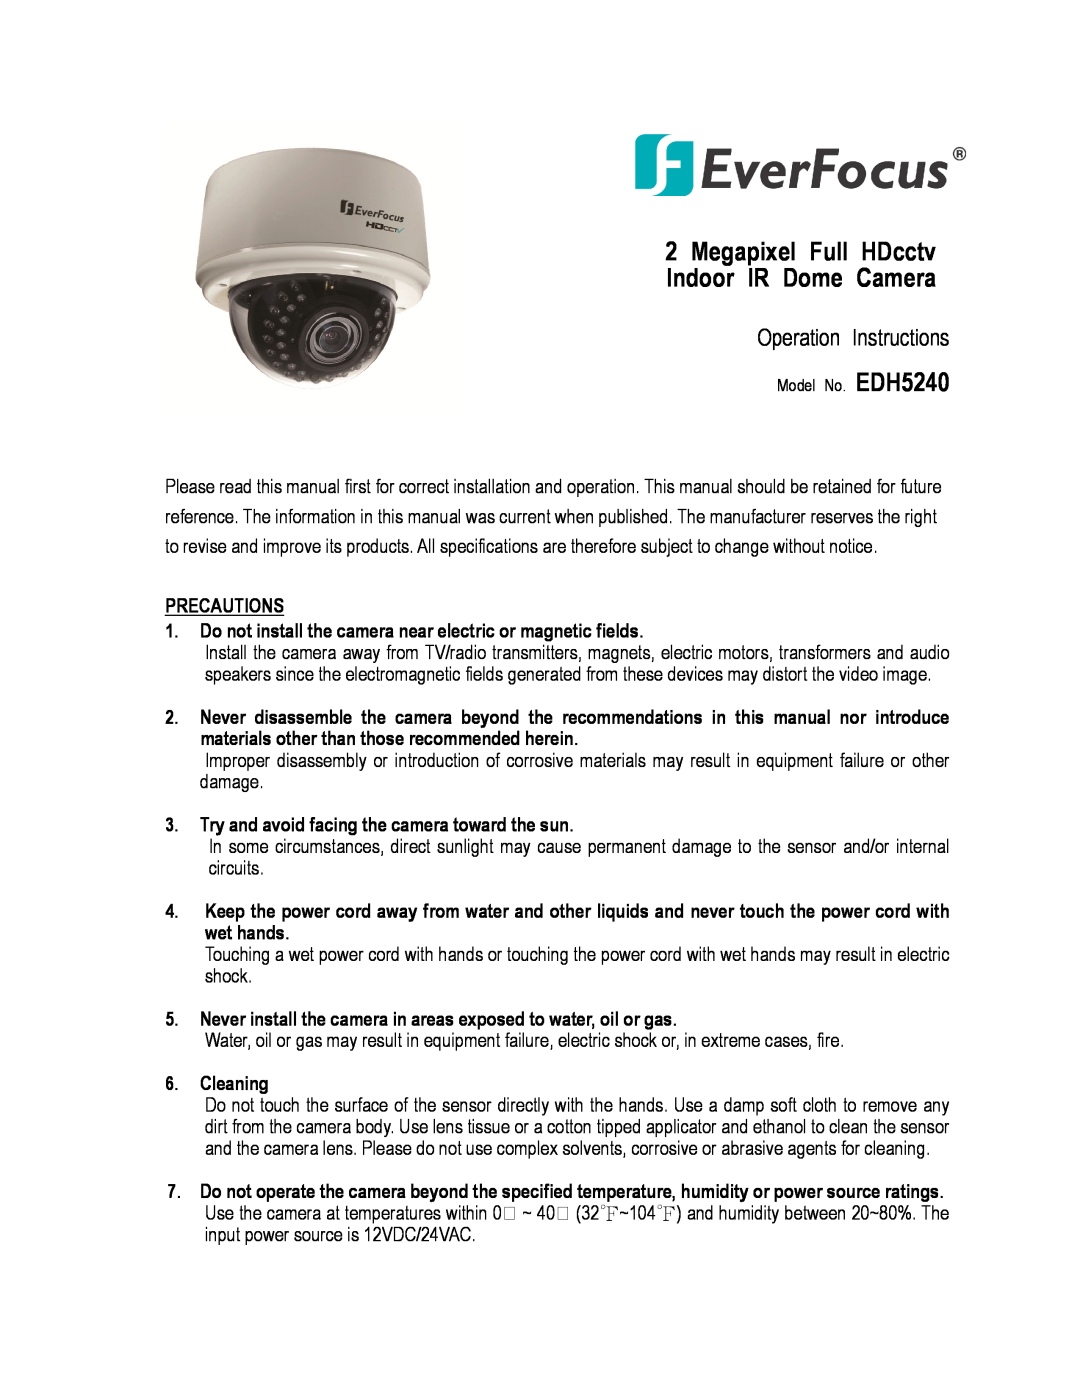 EverFocus EDH5240 specifications Megapixel Full HDcctv Indoor IR Dome Camera, Operation Instructions 